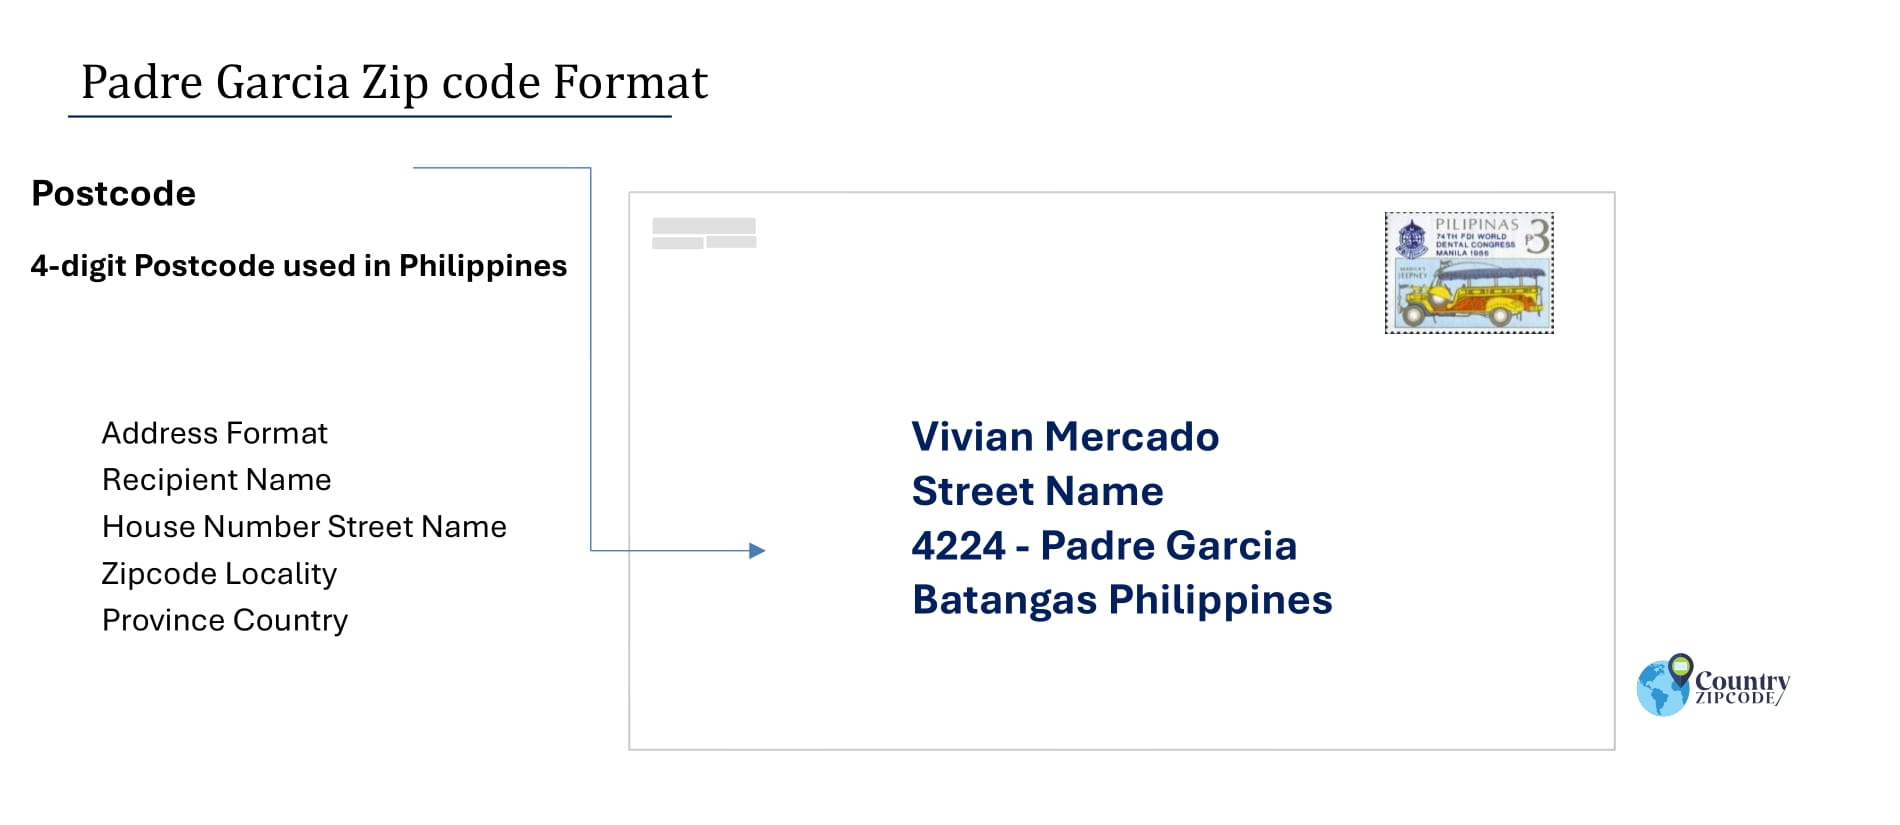 example of Padre Garcia Philippines zip code and address format